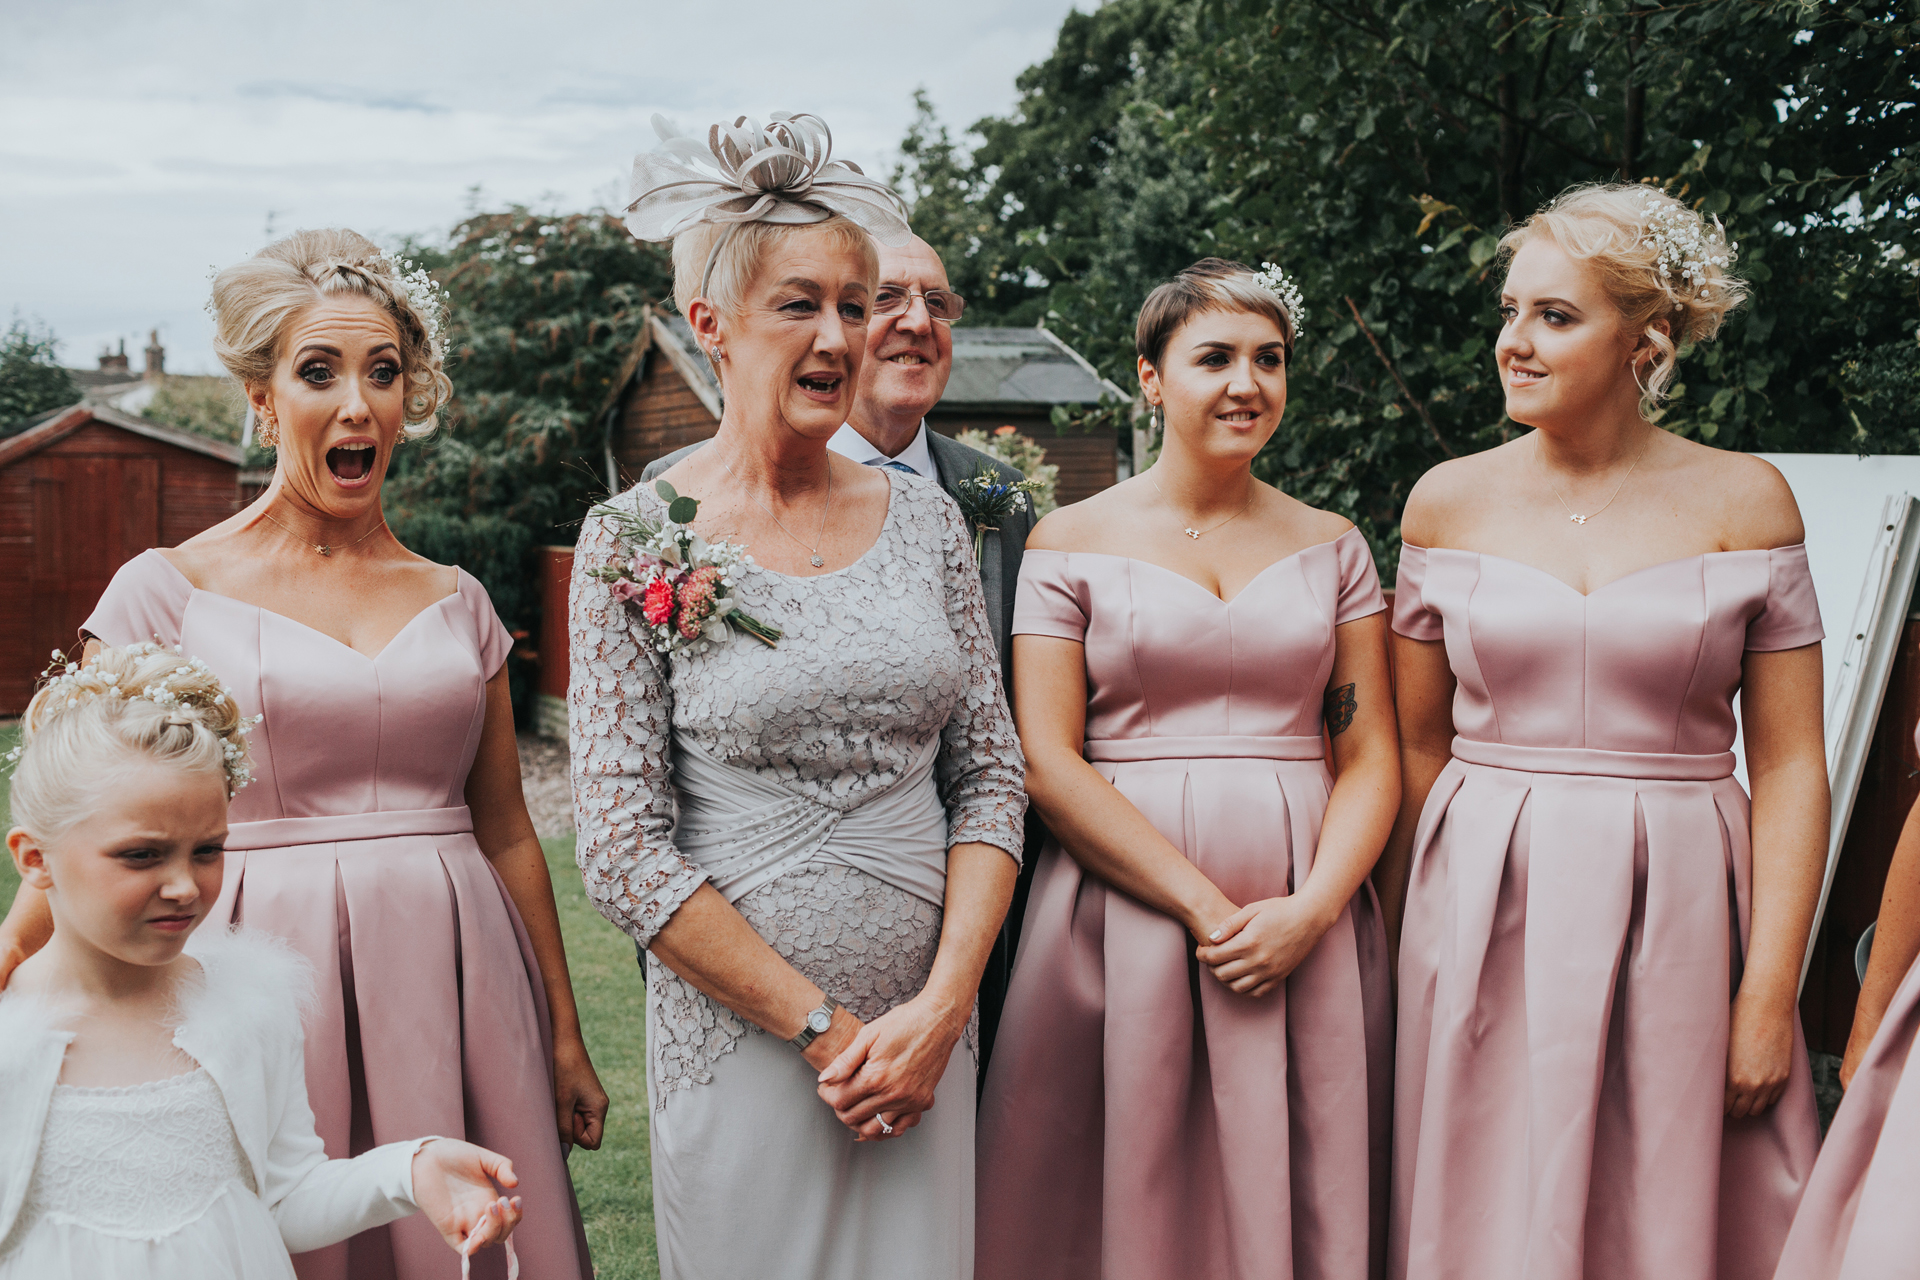 Brides mum and bridesmaids react to her wearing the dress. 